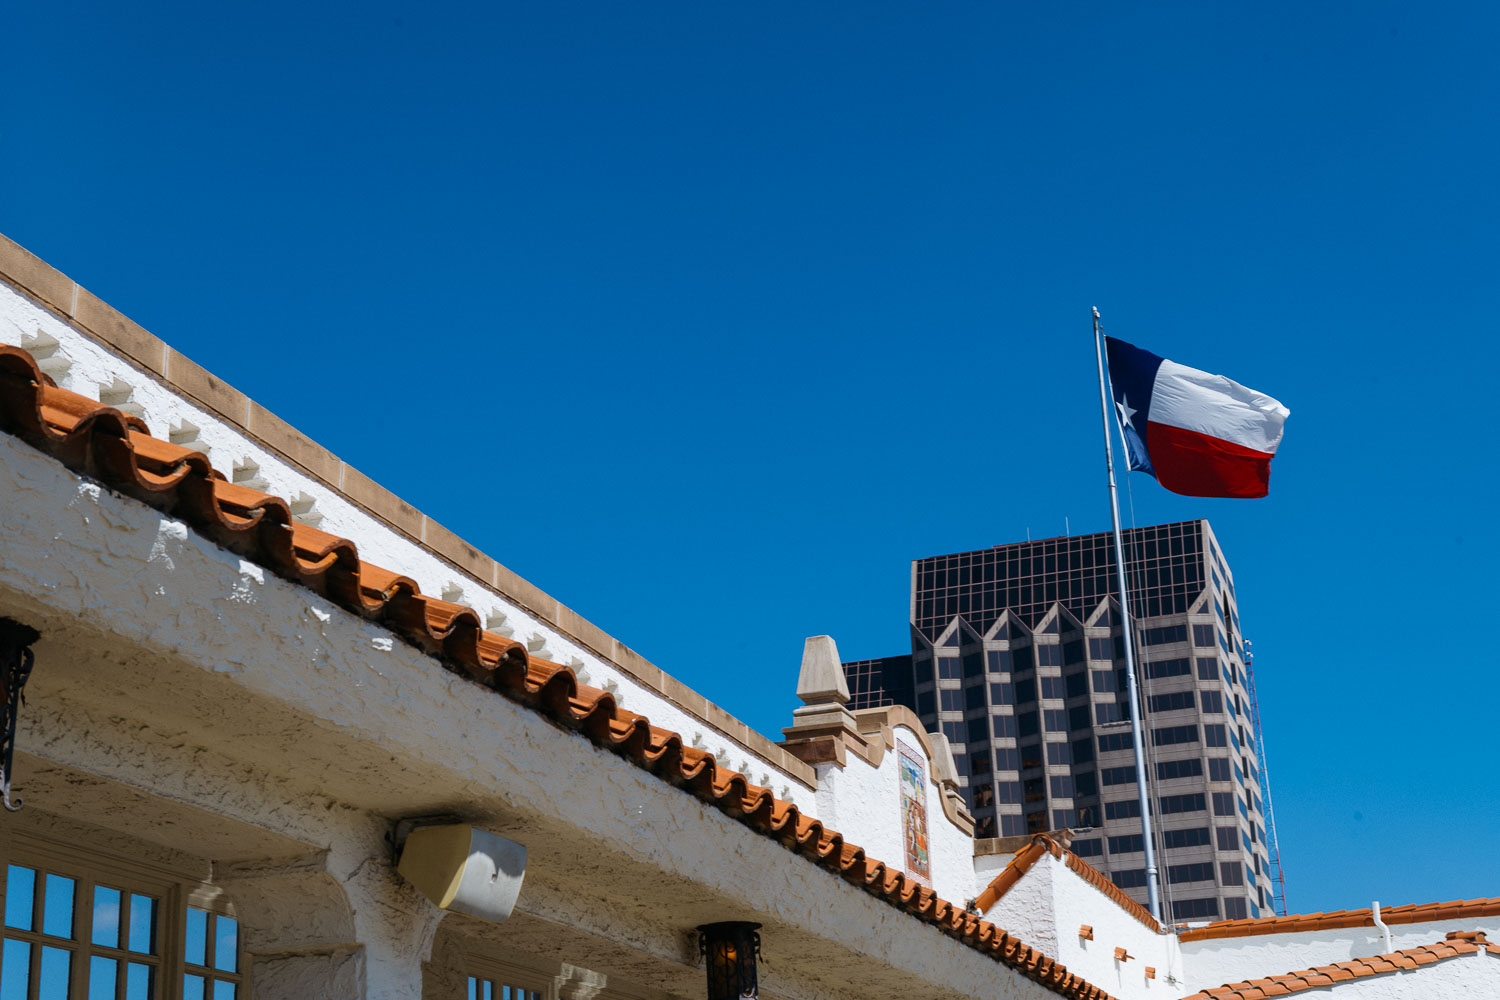 From the roof of St Anthony shows the Texas flag